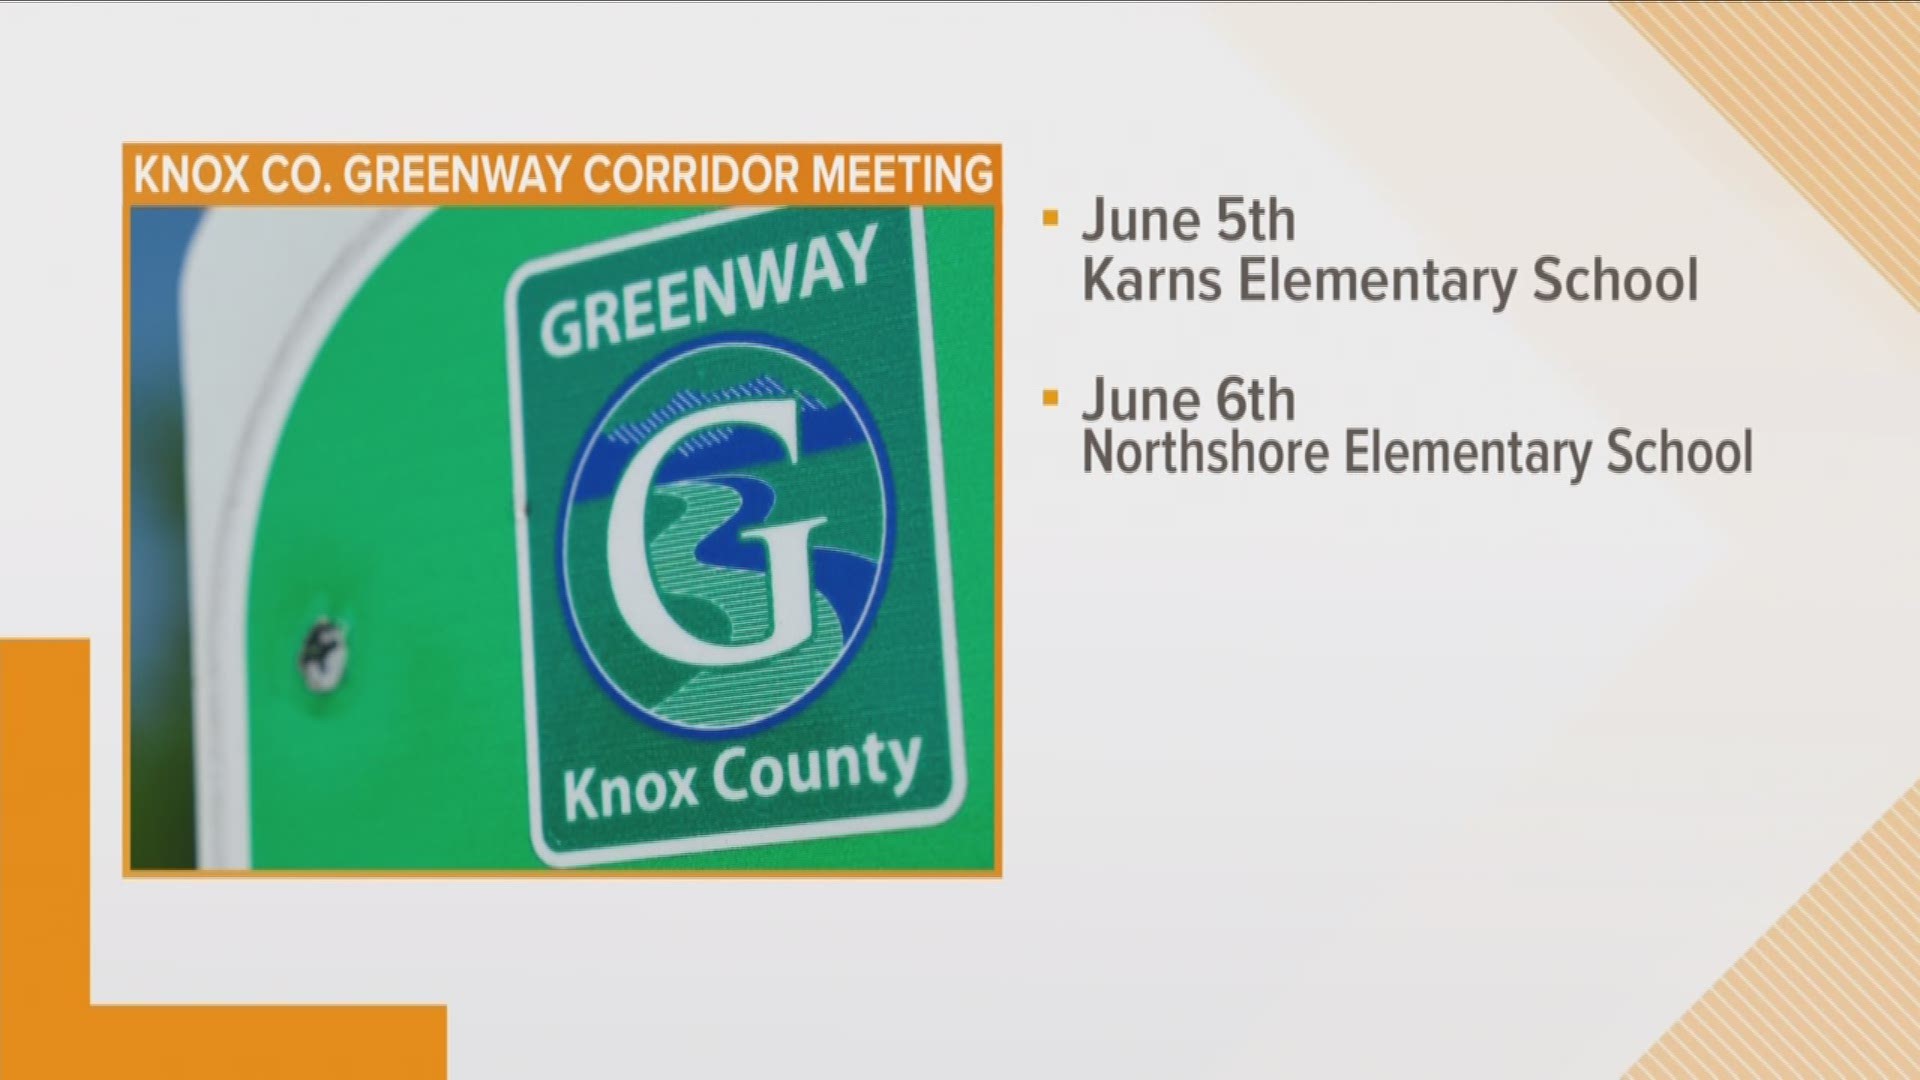 Big changes could be coming to Knox County's greenways. And starting next week- leaders want your input.